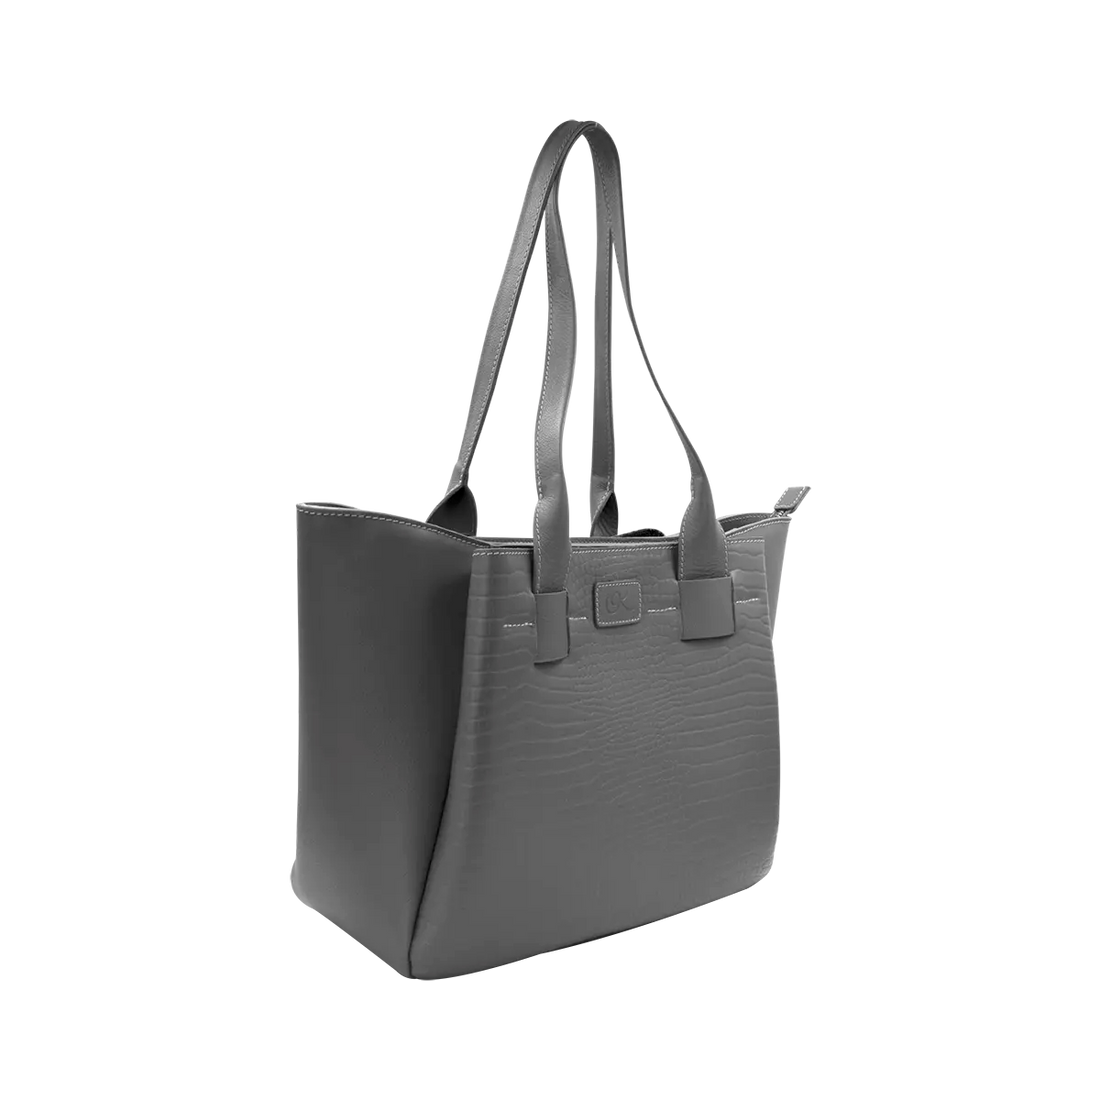 large grey leather tote bag for women. Fashion Accessories, shop now in San Diego, CA.